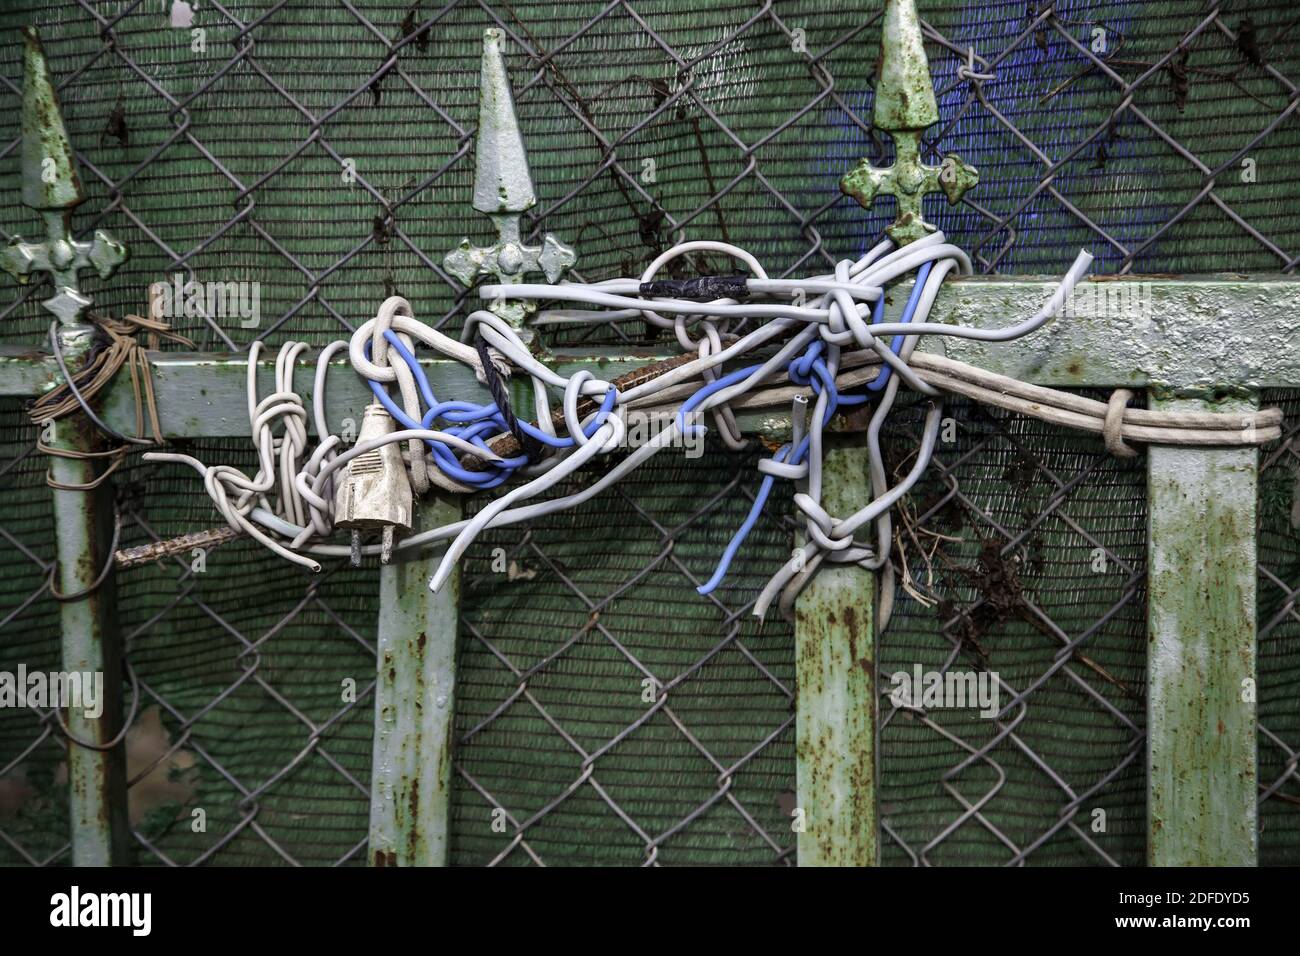 Cables tangled in door to protect, lock and security Stock Photo